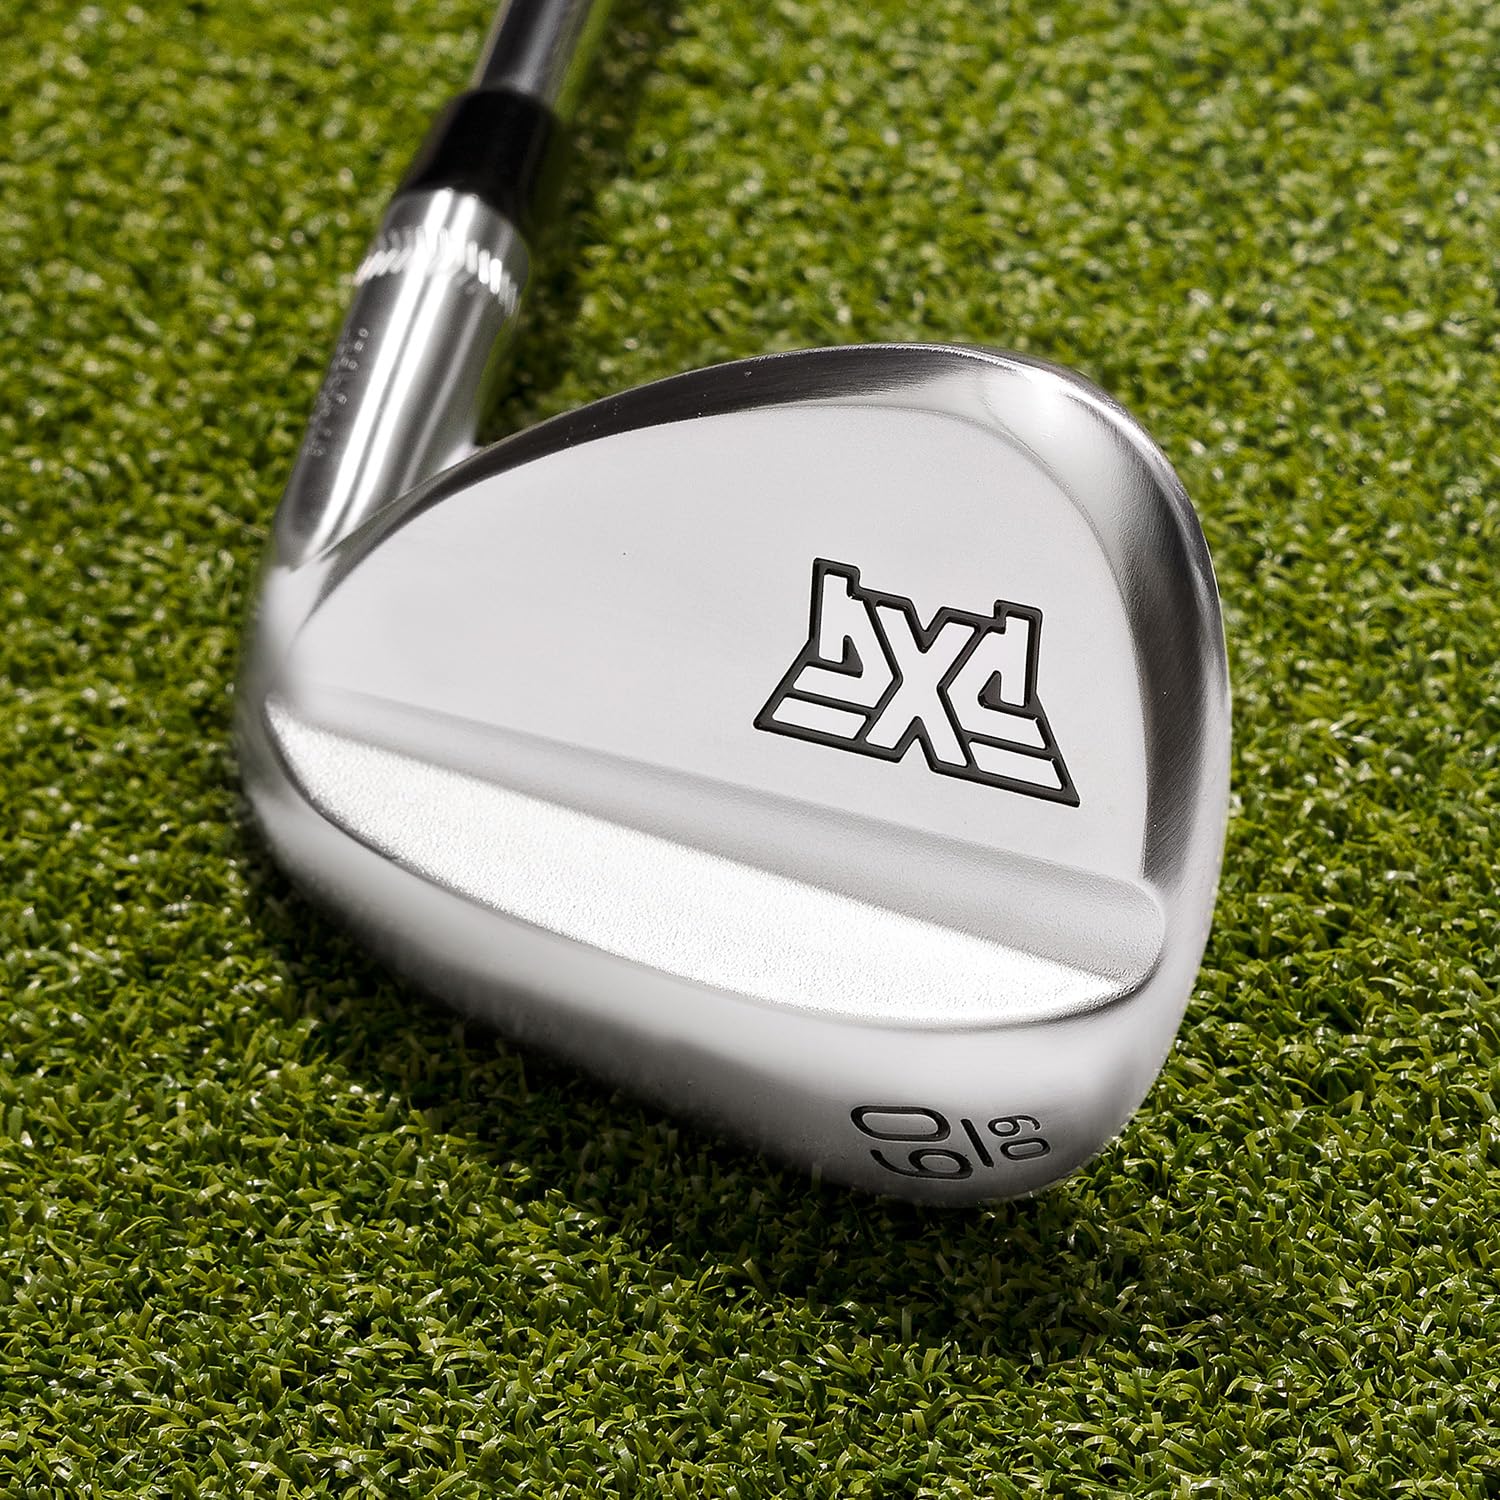 PXG V3 0311 Right Handed Forged Golf Wedge Available in Gap Wedge, Sand Wedge and Lob Wedge